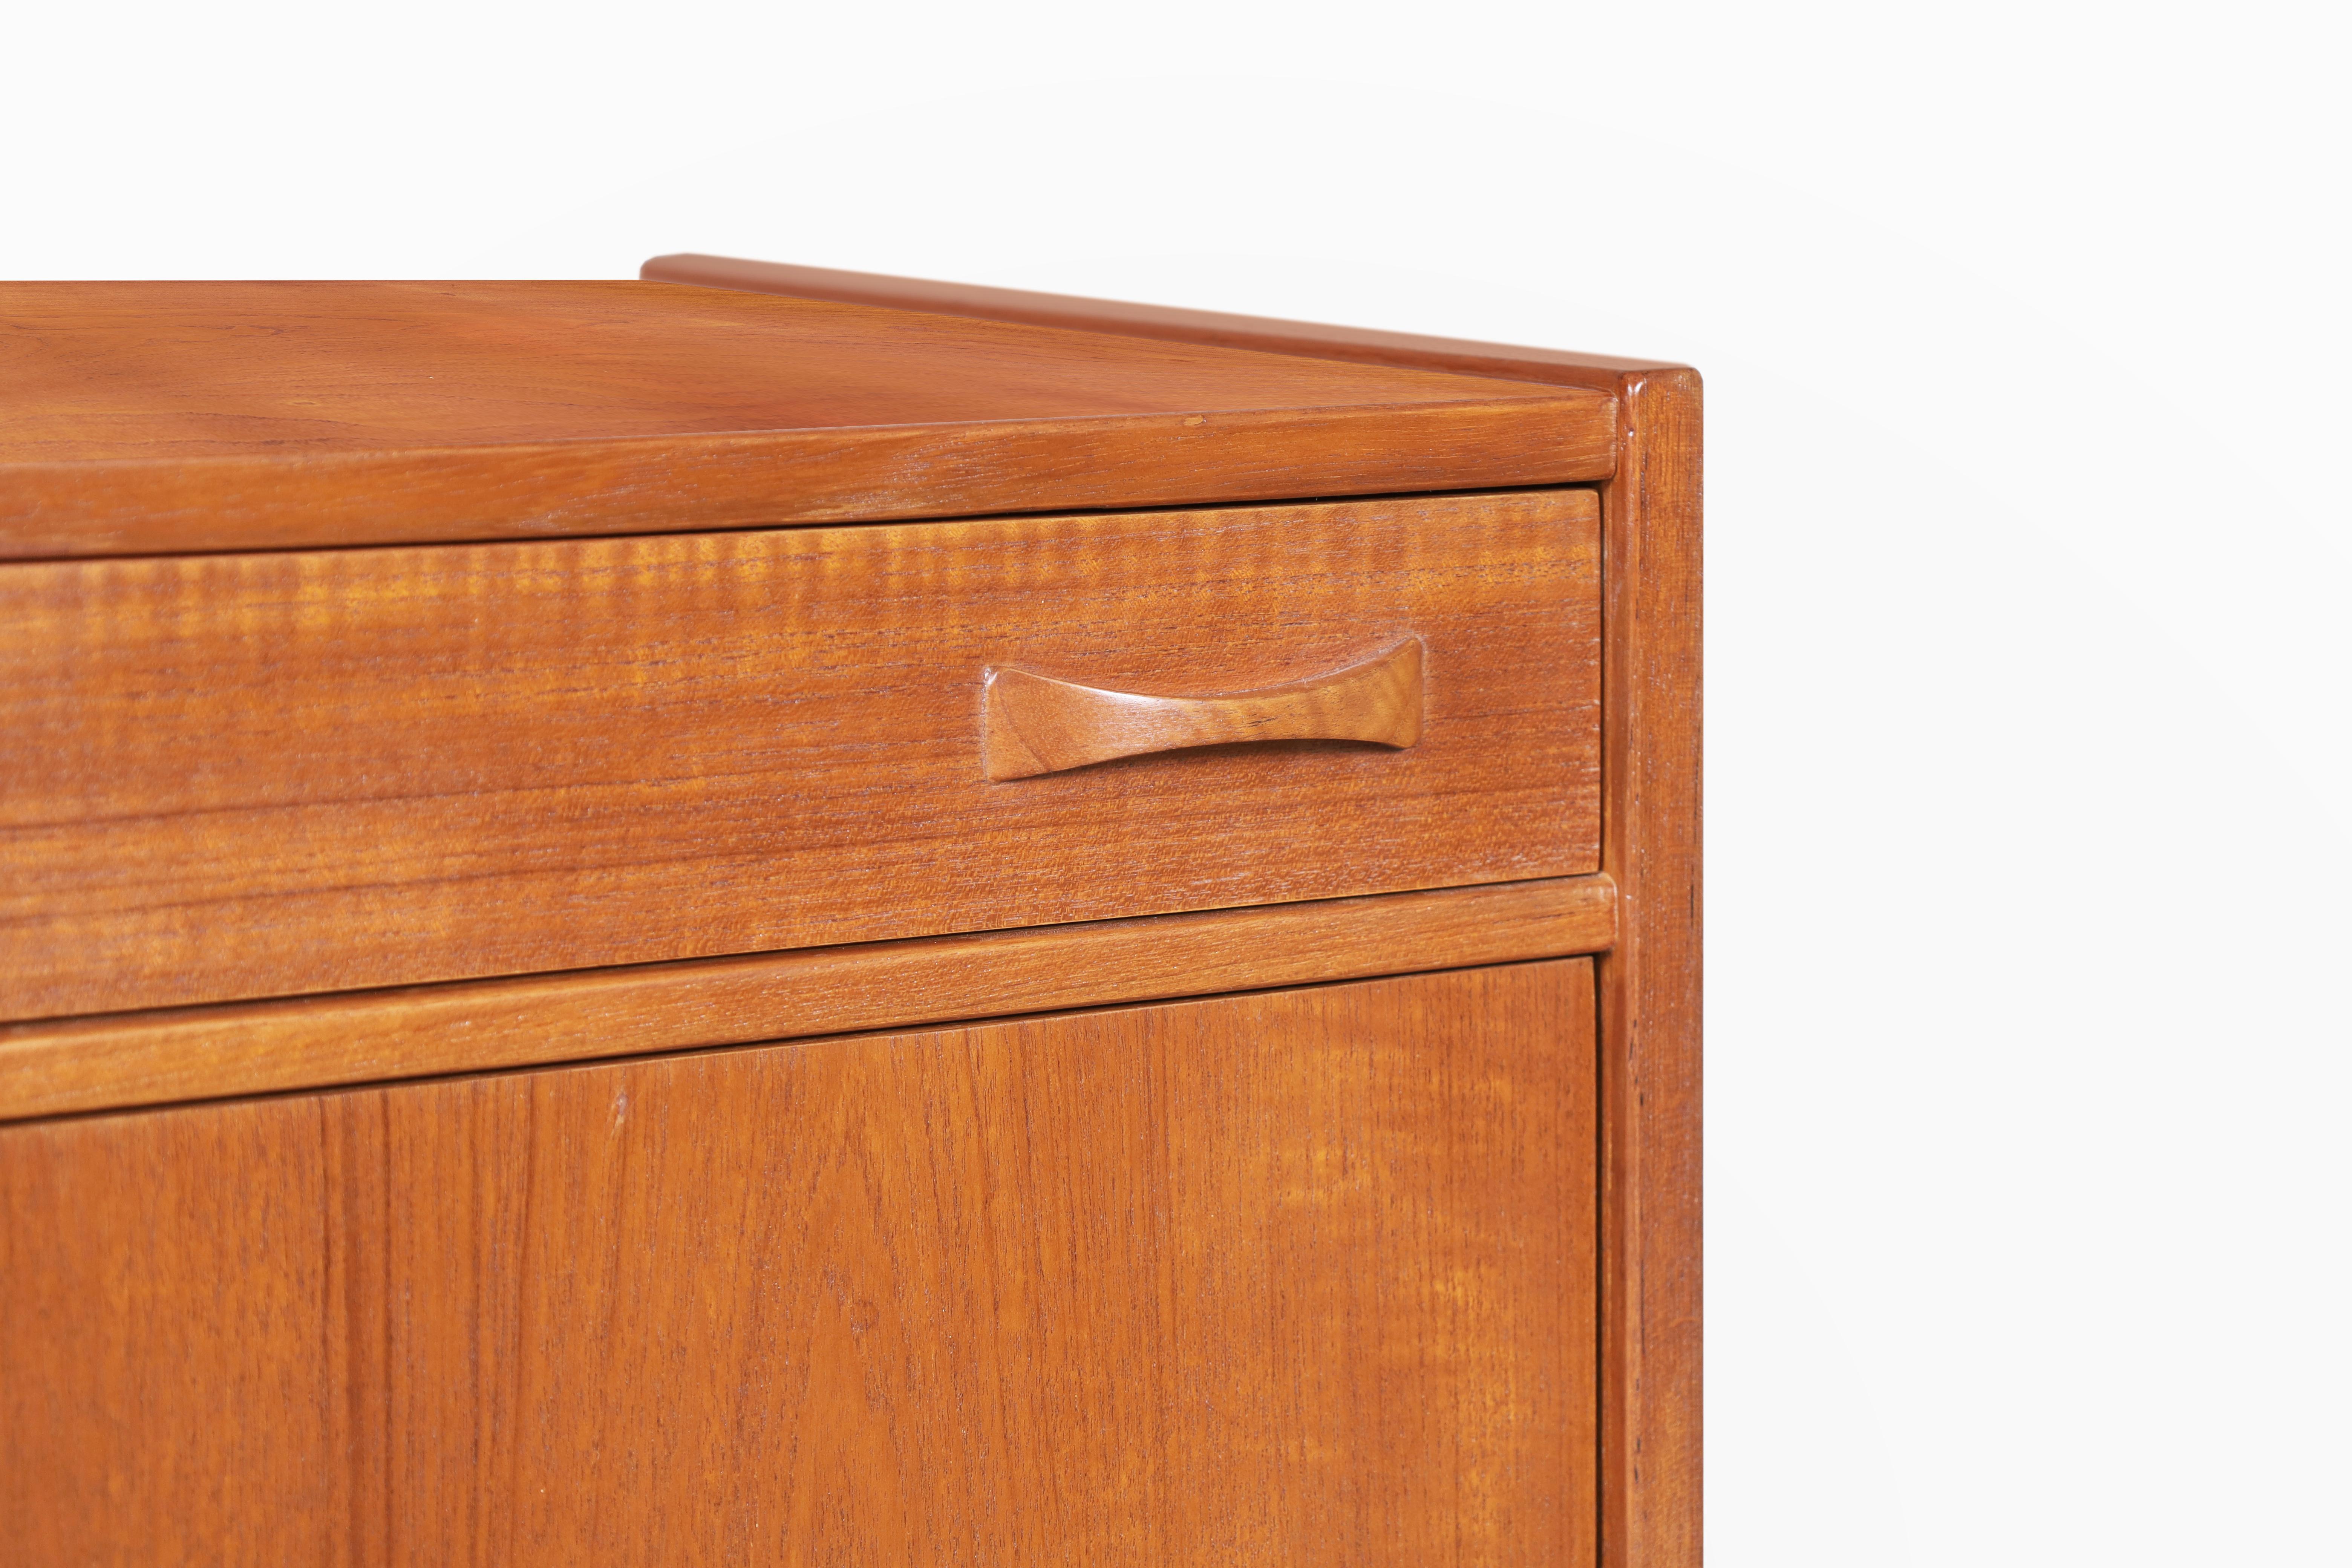 Mid-20th Century Swedish Teak Credenza by Tage Olofsson for Ulferts Mobler For Sale